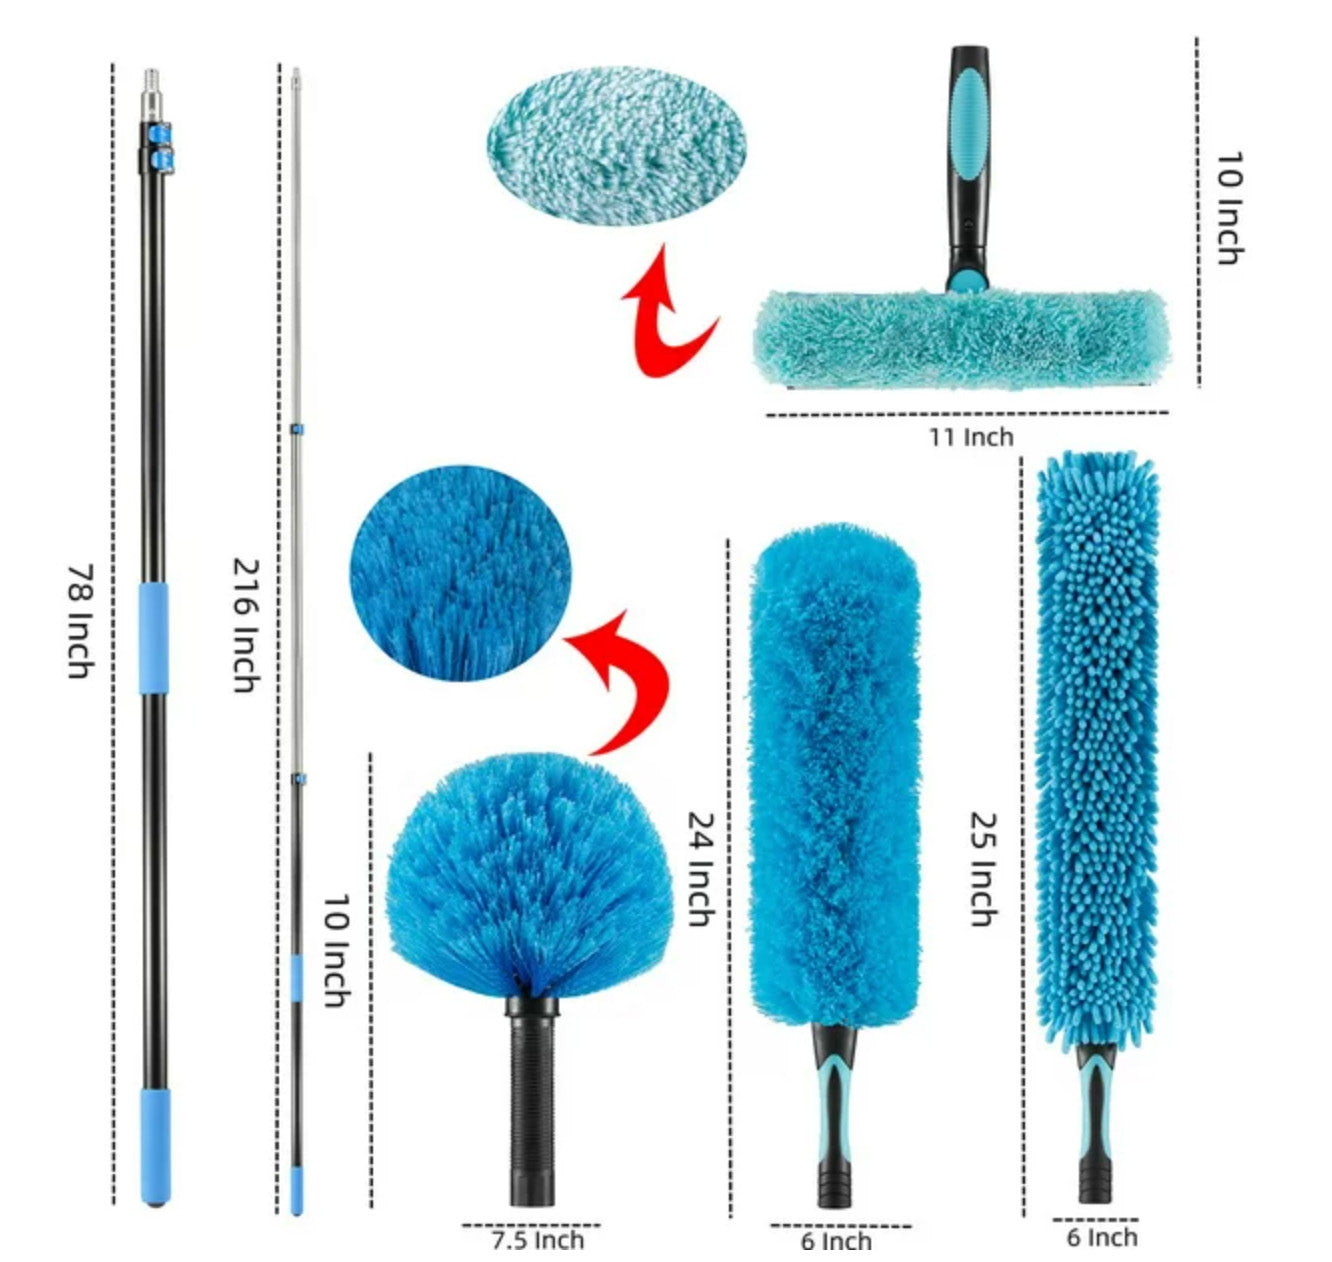 20 Foot High Ceiling Fan Duster with 5-12 Foot Extension Pole, Extendable Reusable Cobweb, Feather, Window Cleaning Squeegee Kit